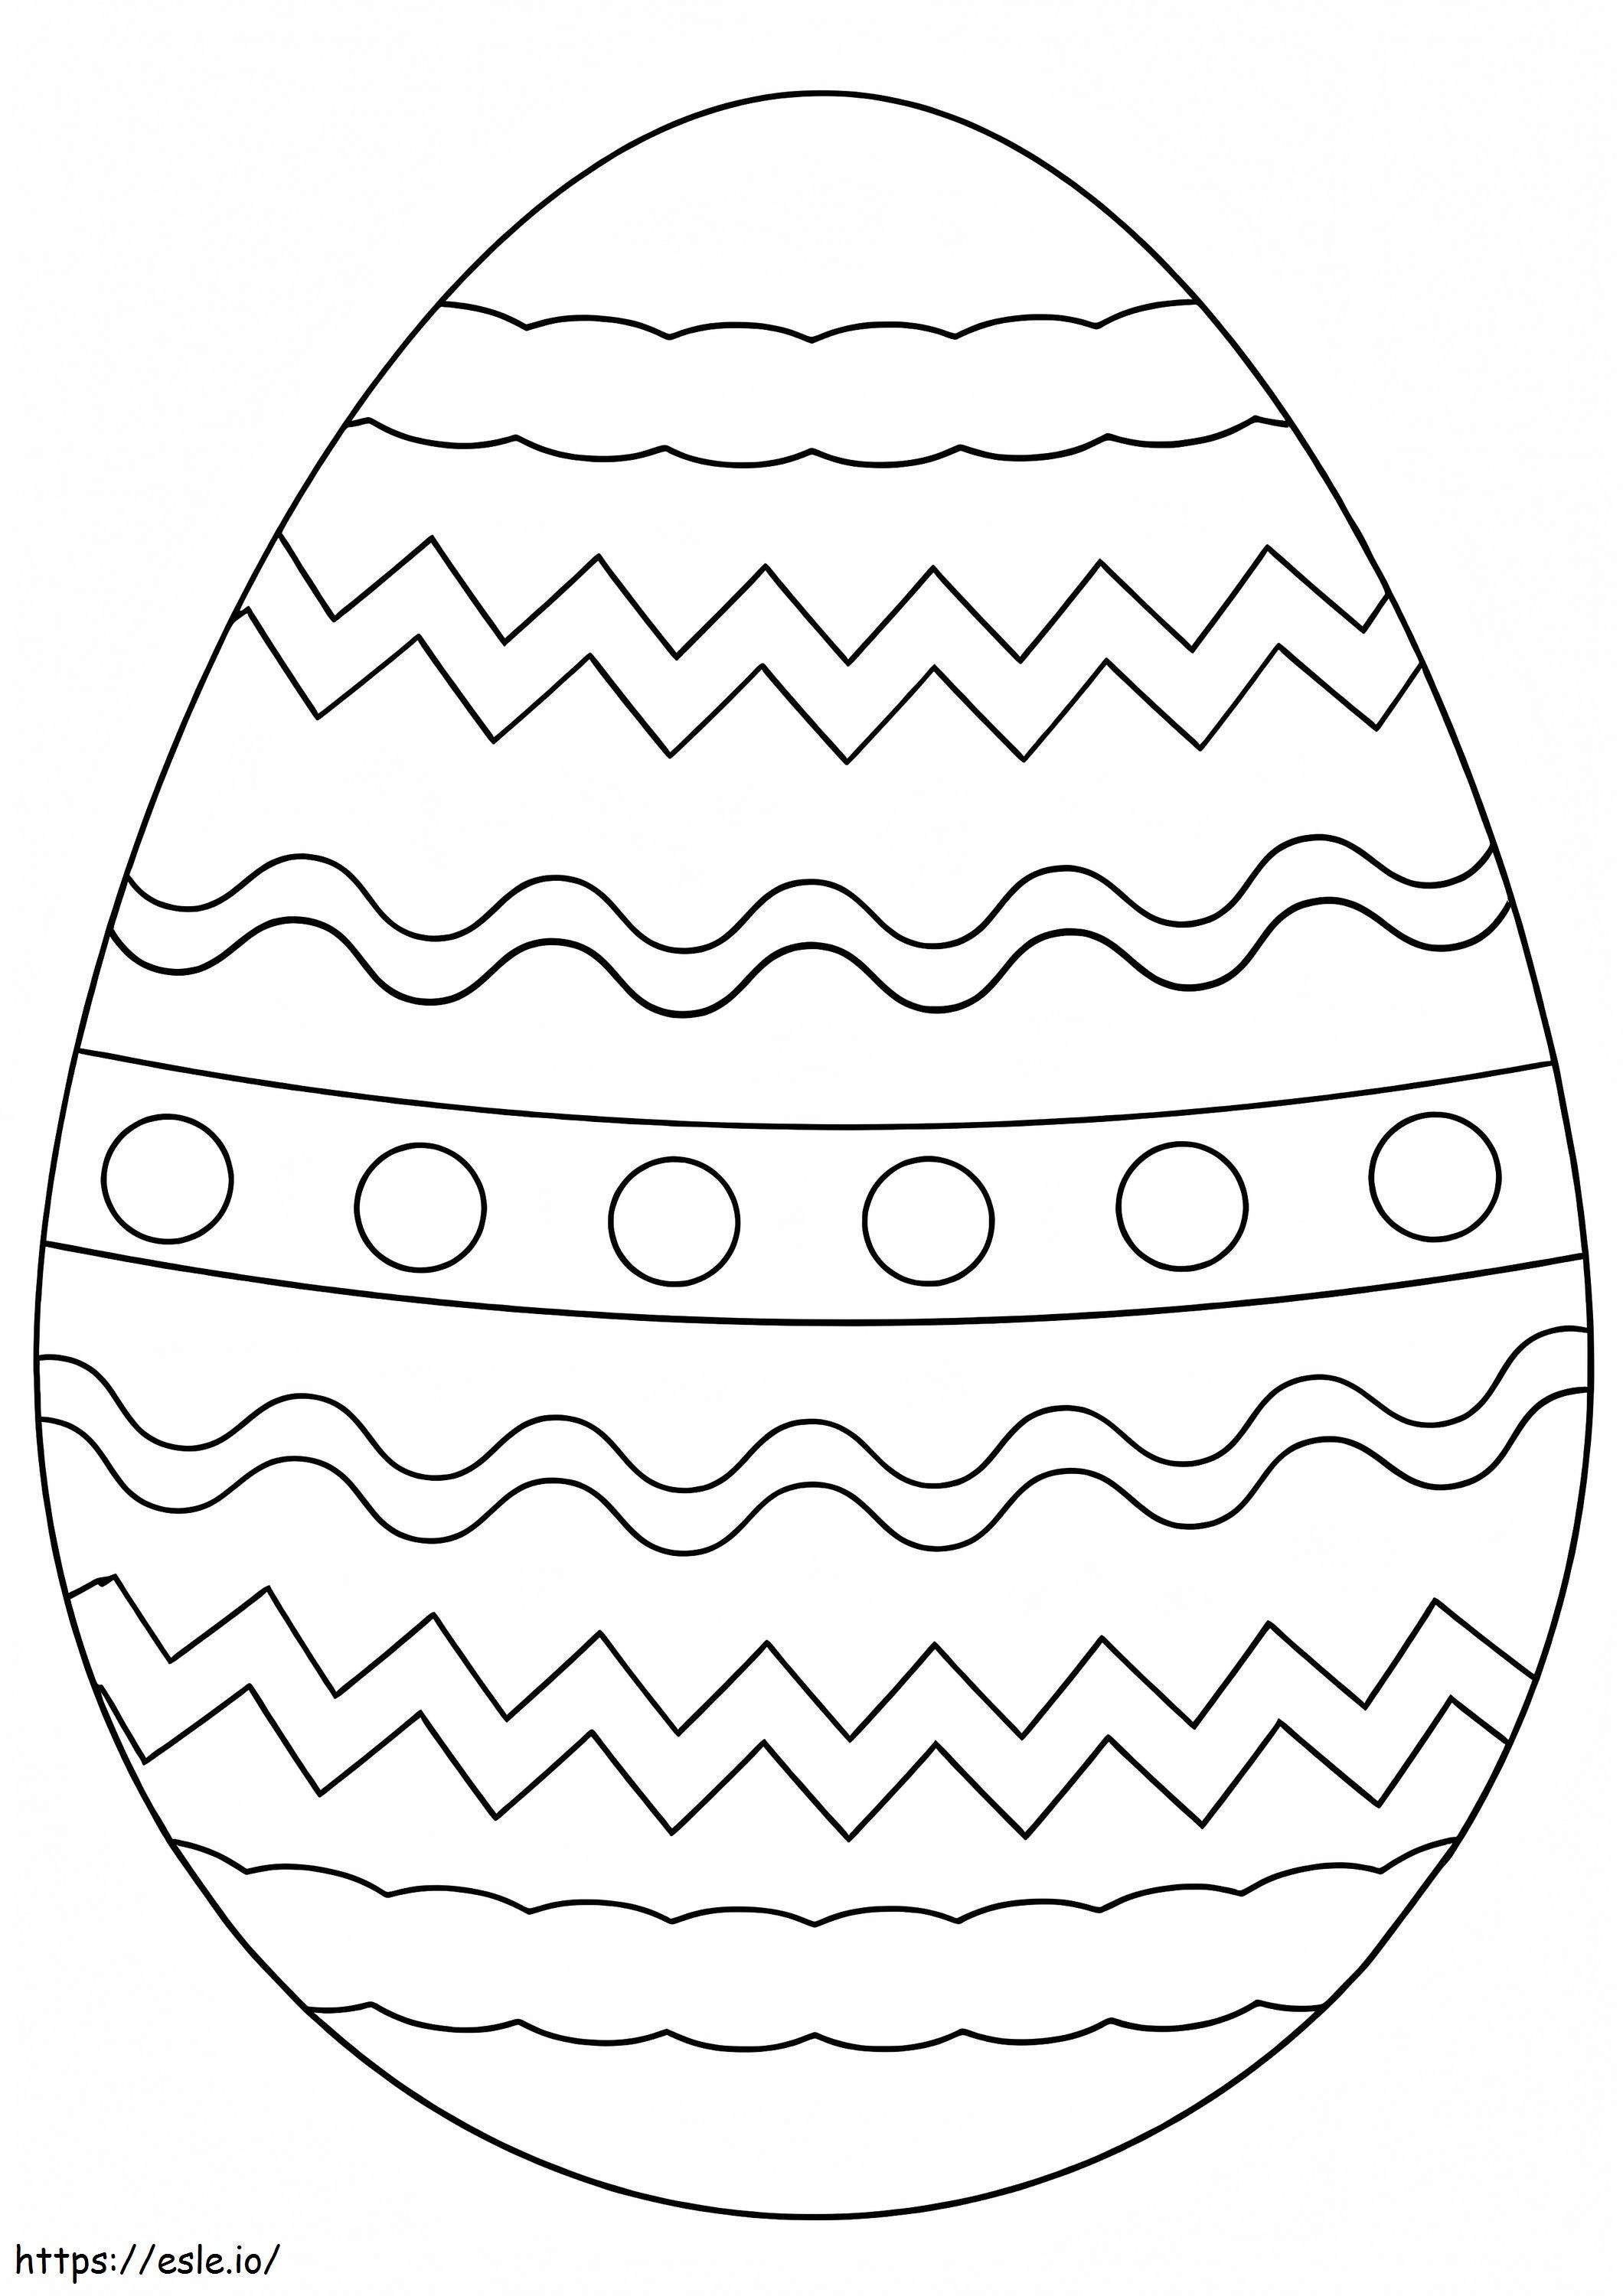 Sweet Easter Egg coloring page